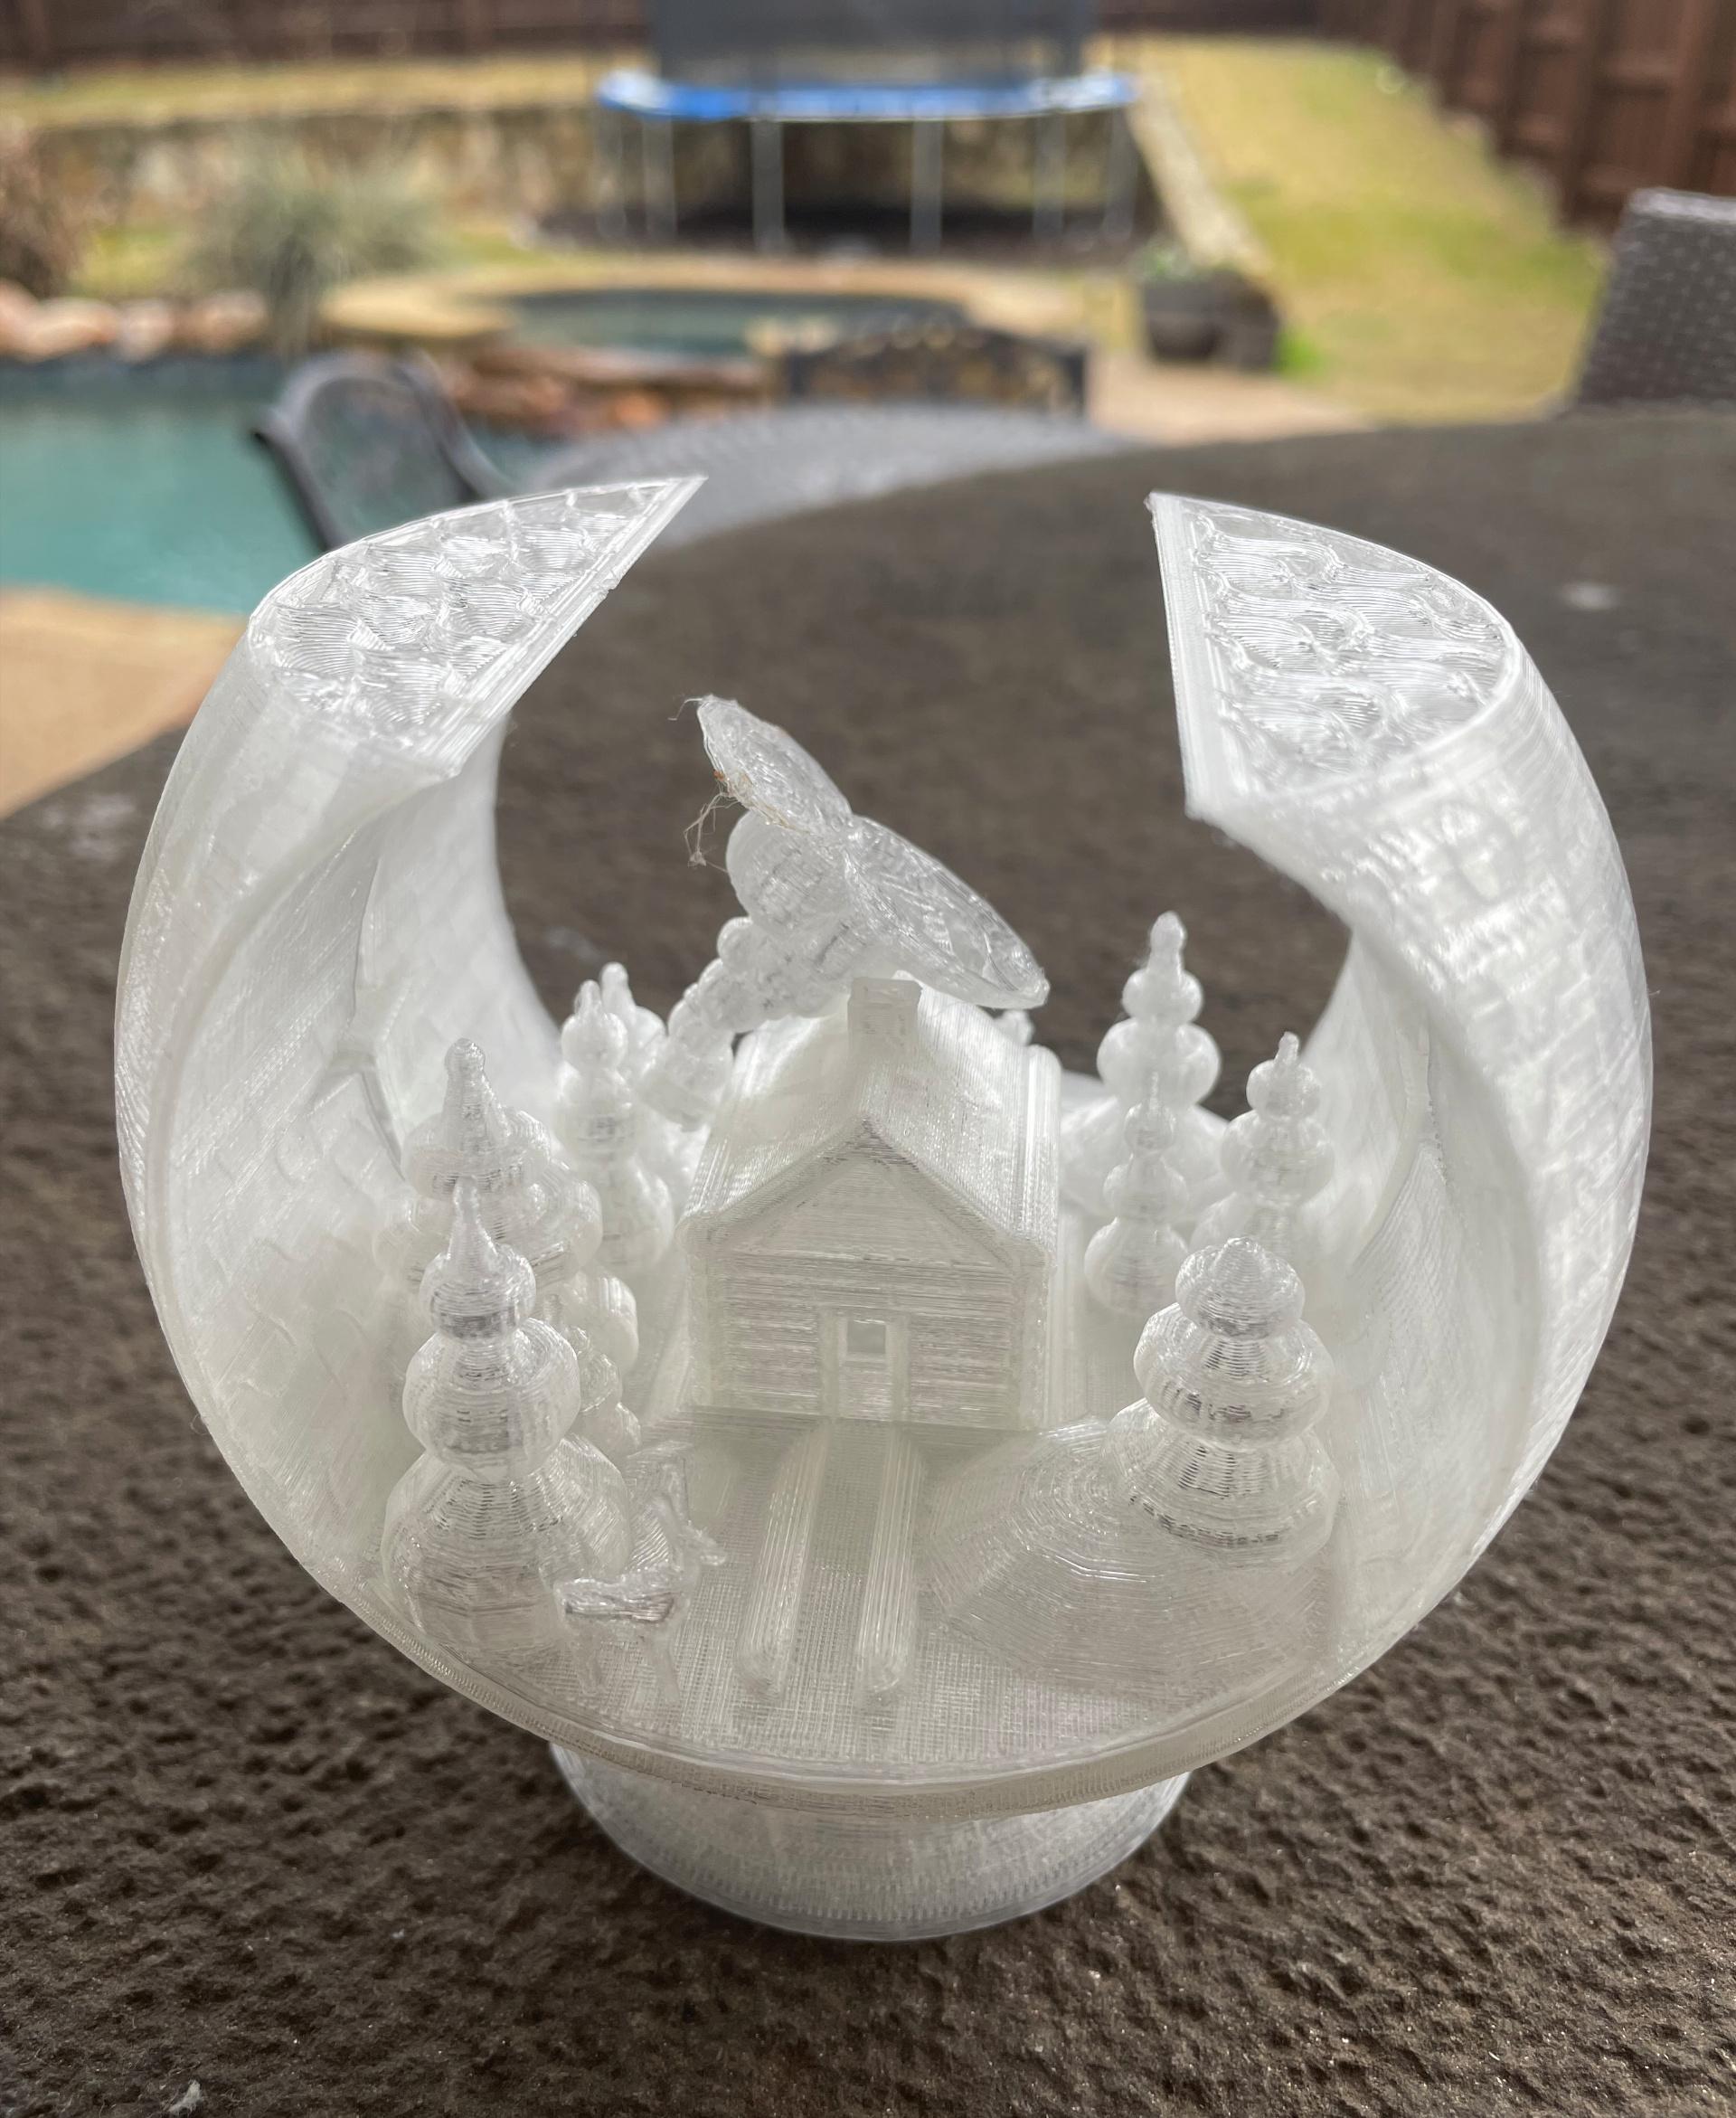 Snow Globe Votive Ornament - Winter Cabin - Chimney broke off the roof only a layer or 2 before it was going to connect with the top part of the globe and reinforce it :( :(  -- about 14 hours into print.. I tried to superglue, and modified the gcode to resume at that layer, but the superglue didn't hold up and broke again.. So bummed, this was gonna look so cook in clear PLA :( - 3d model